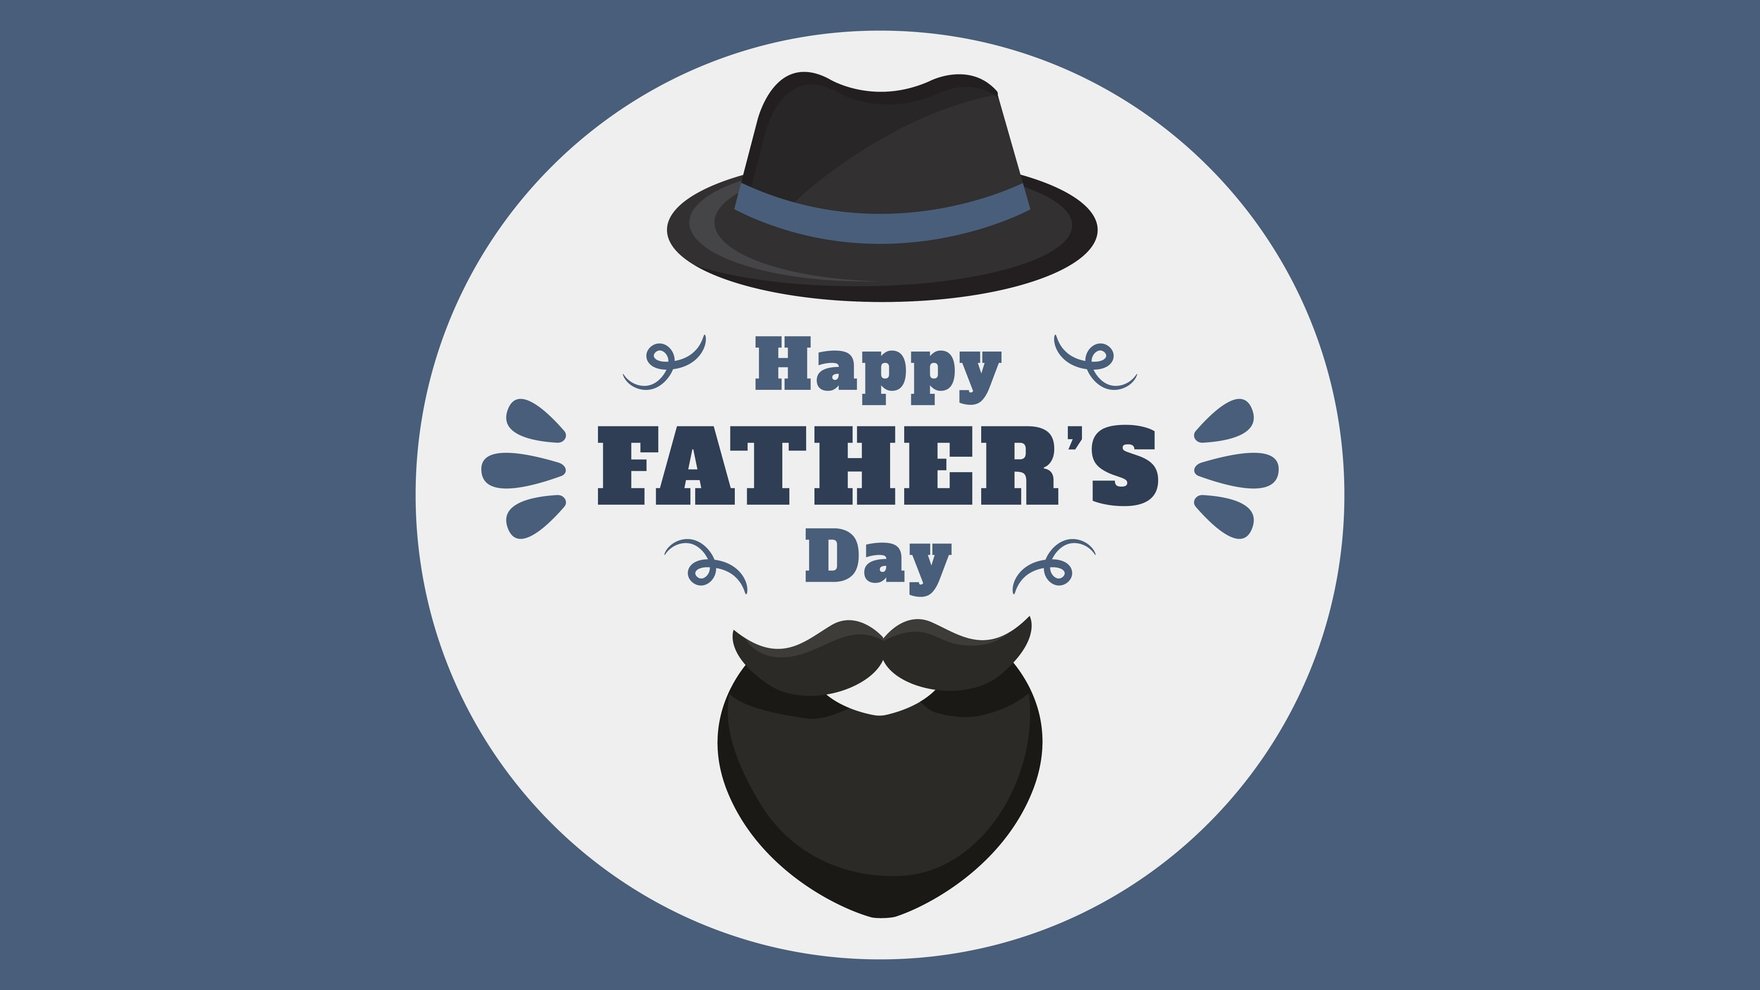 Simple Father's Day Background in Illustrator, EPS, SVG, JPG, PNG